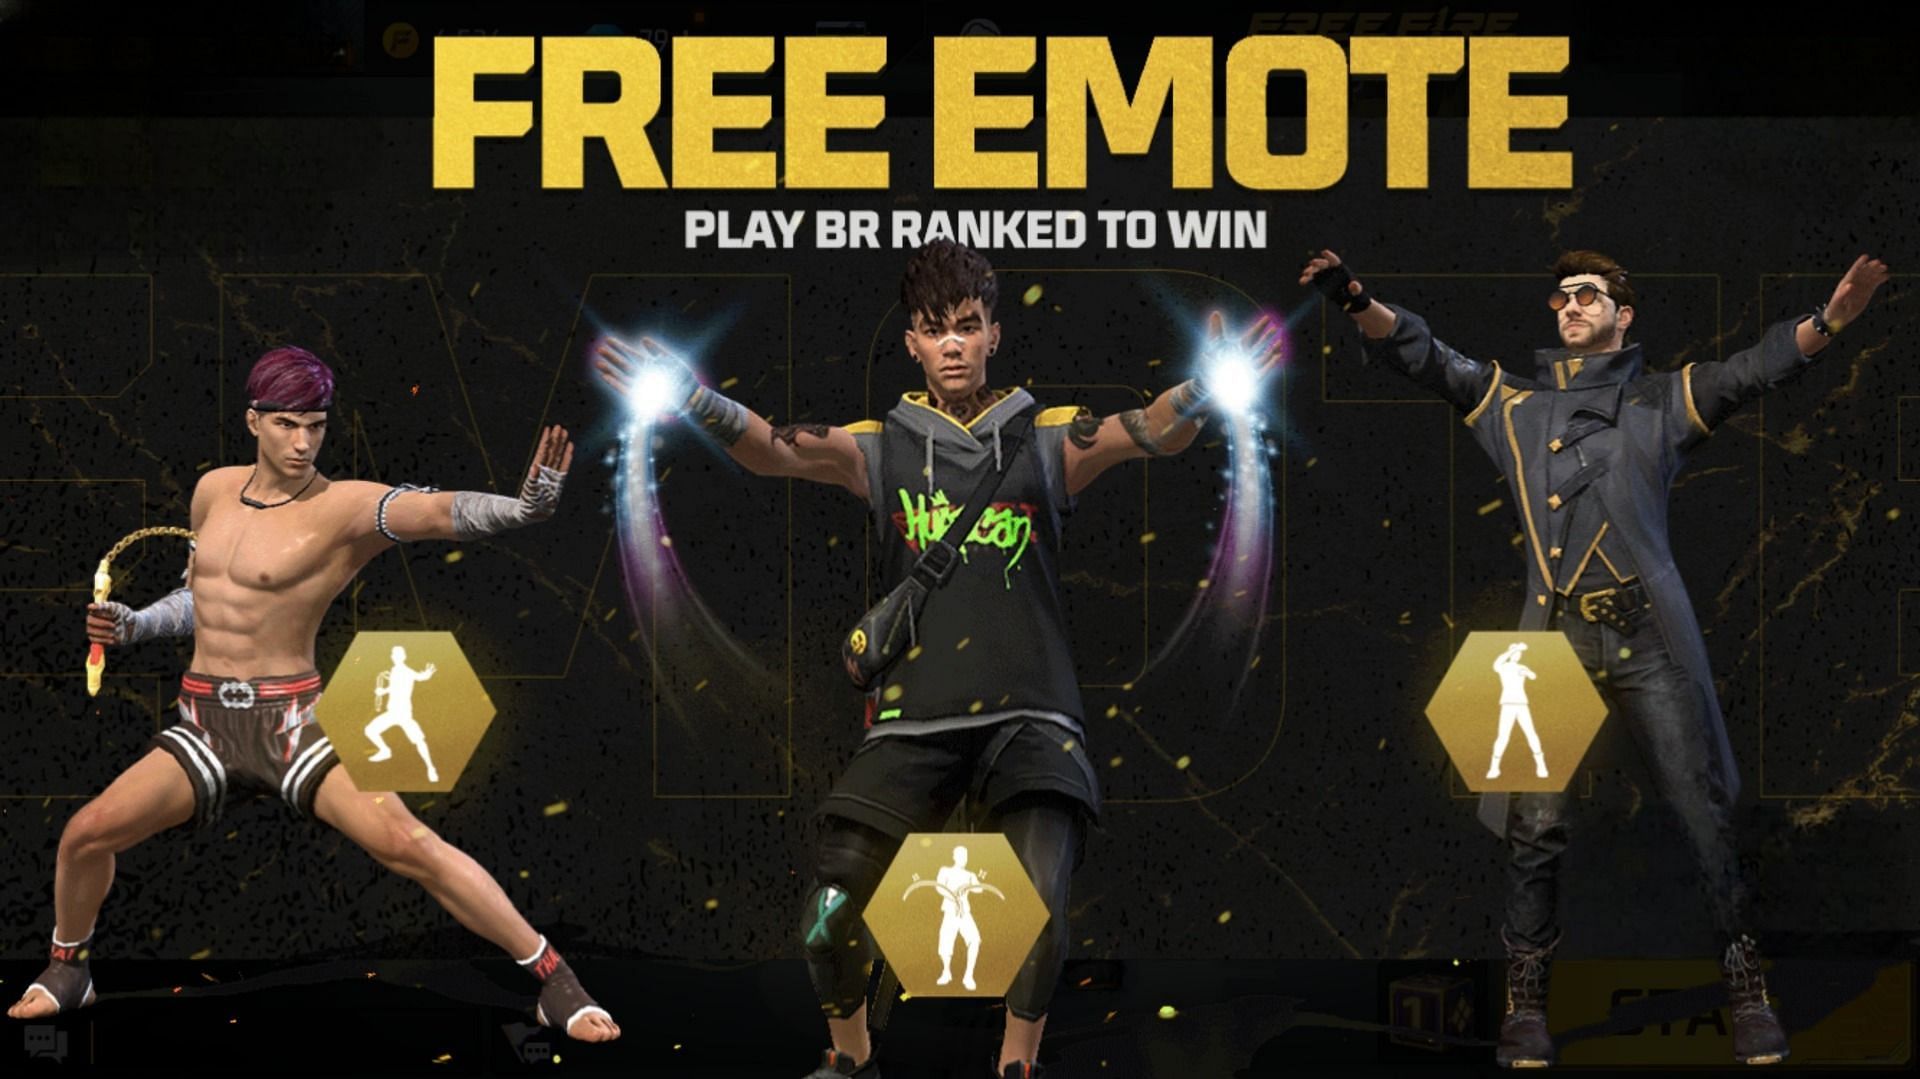 You can get a free emote this week through the new event (Image via Garena)